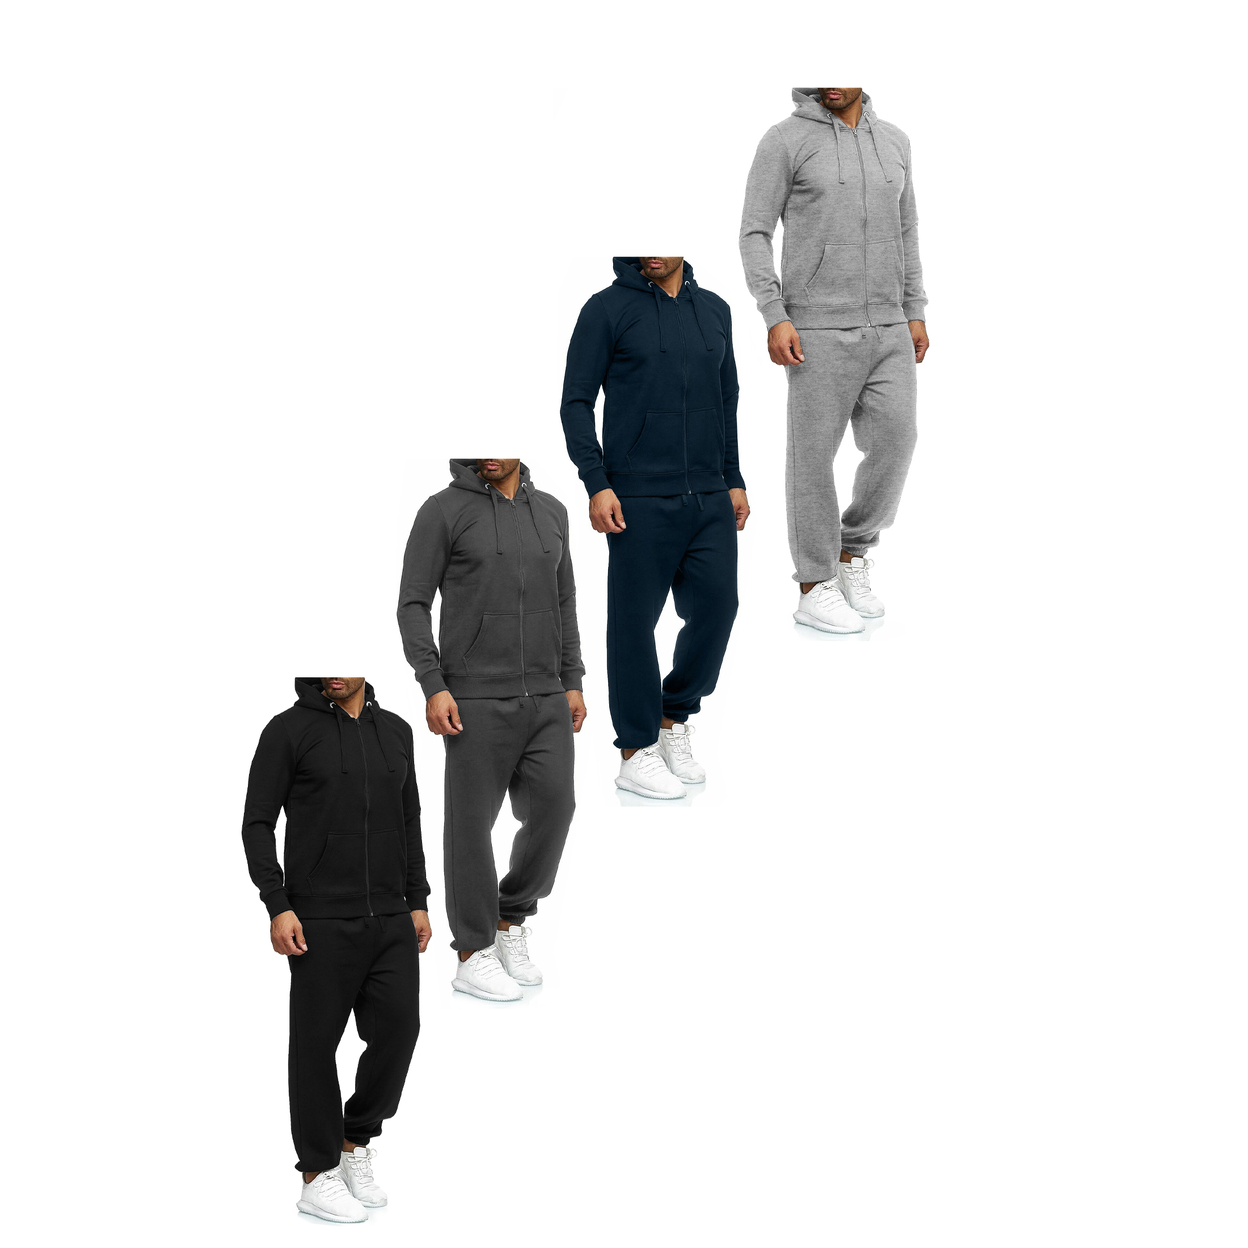 Multi-Pack: Men's Casual Big & Tall Athletic Active Winter Warm Fleece Lined Full Zip Tracksuit Jogger Set - Charcoal, 1-pack, Large